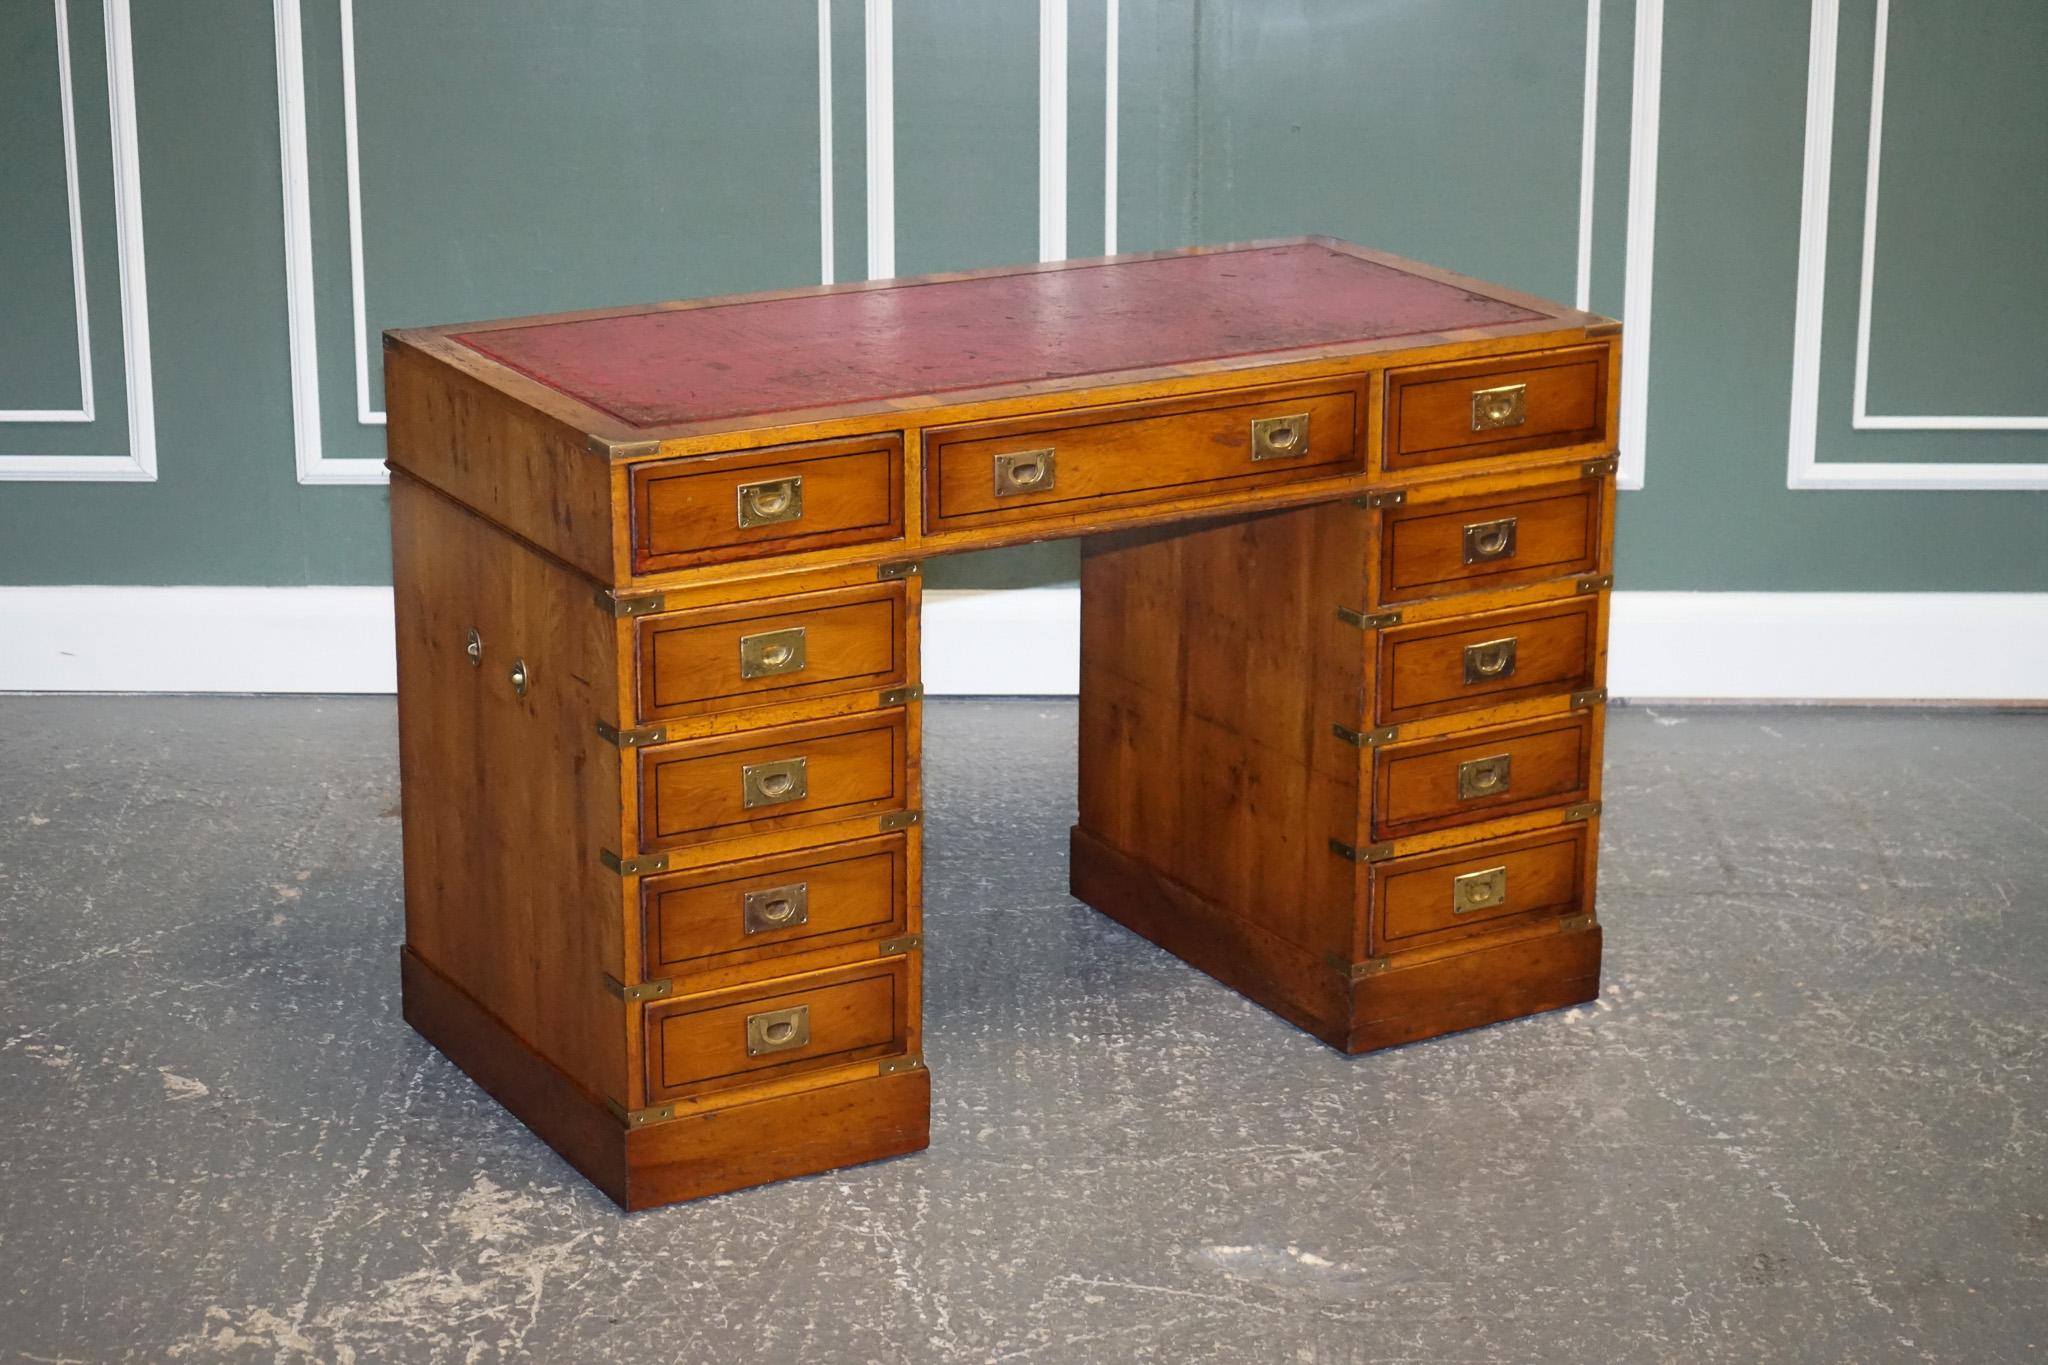 Antiques of London are delighted to offer for sale this vintage military campaign red leather yew wood pedestal desk.

This is a beautiful find, quite rare as it's all drawers, 9 in total. Usually, they have a filing drawer which takes up the